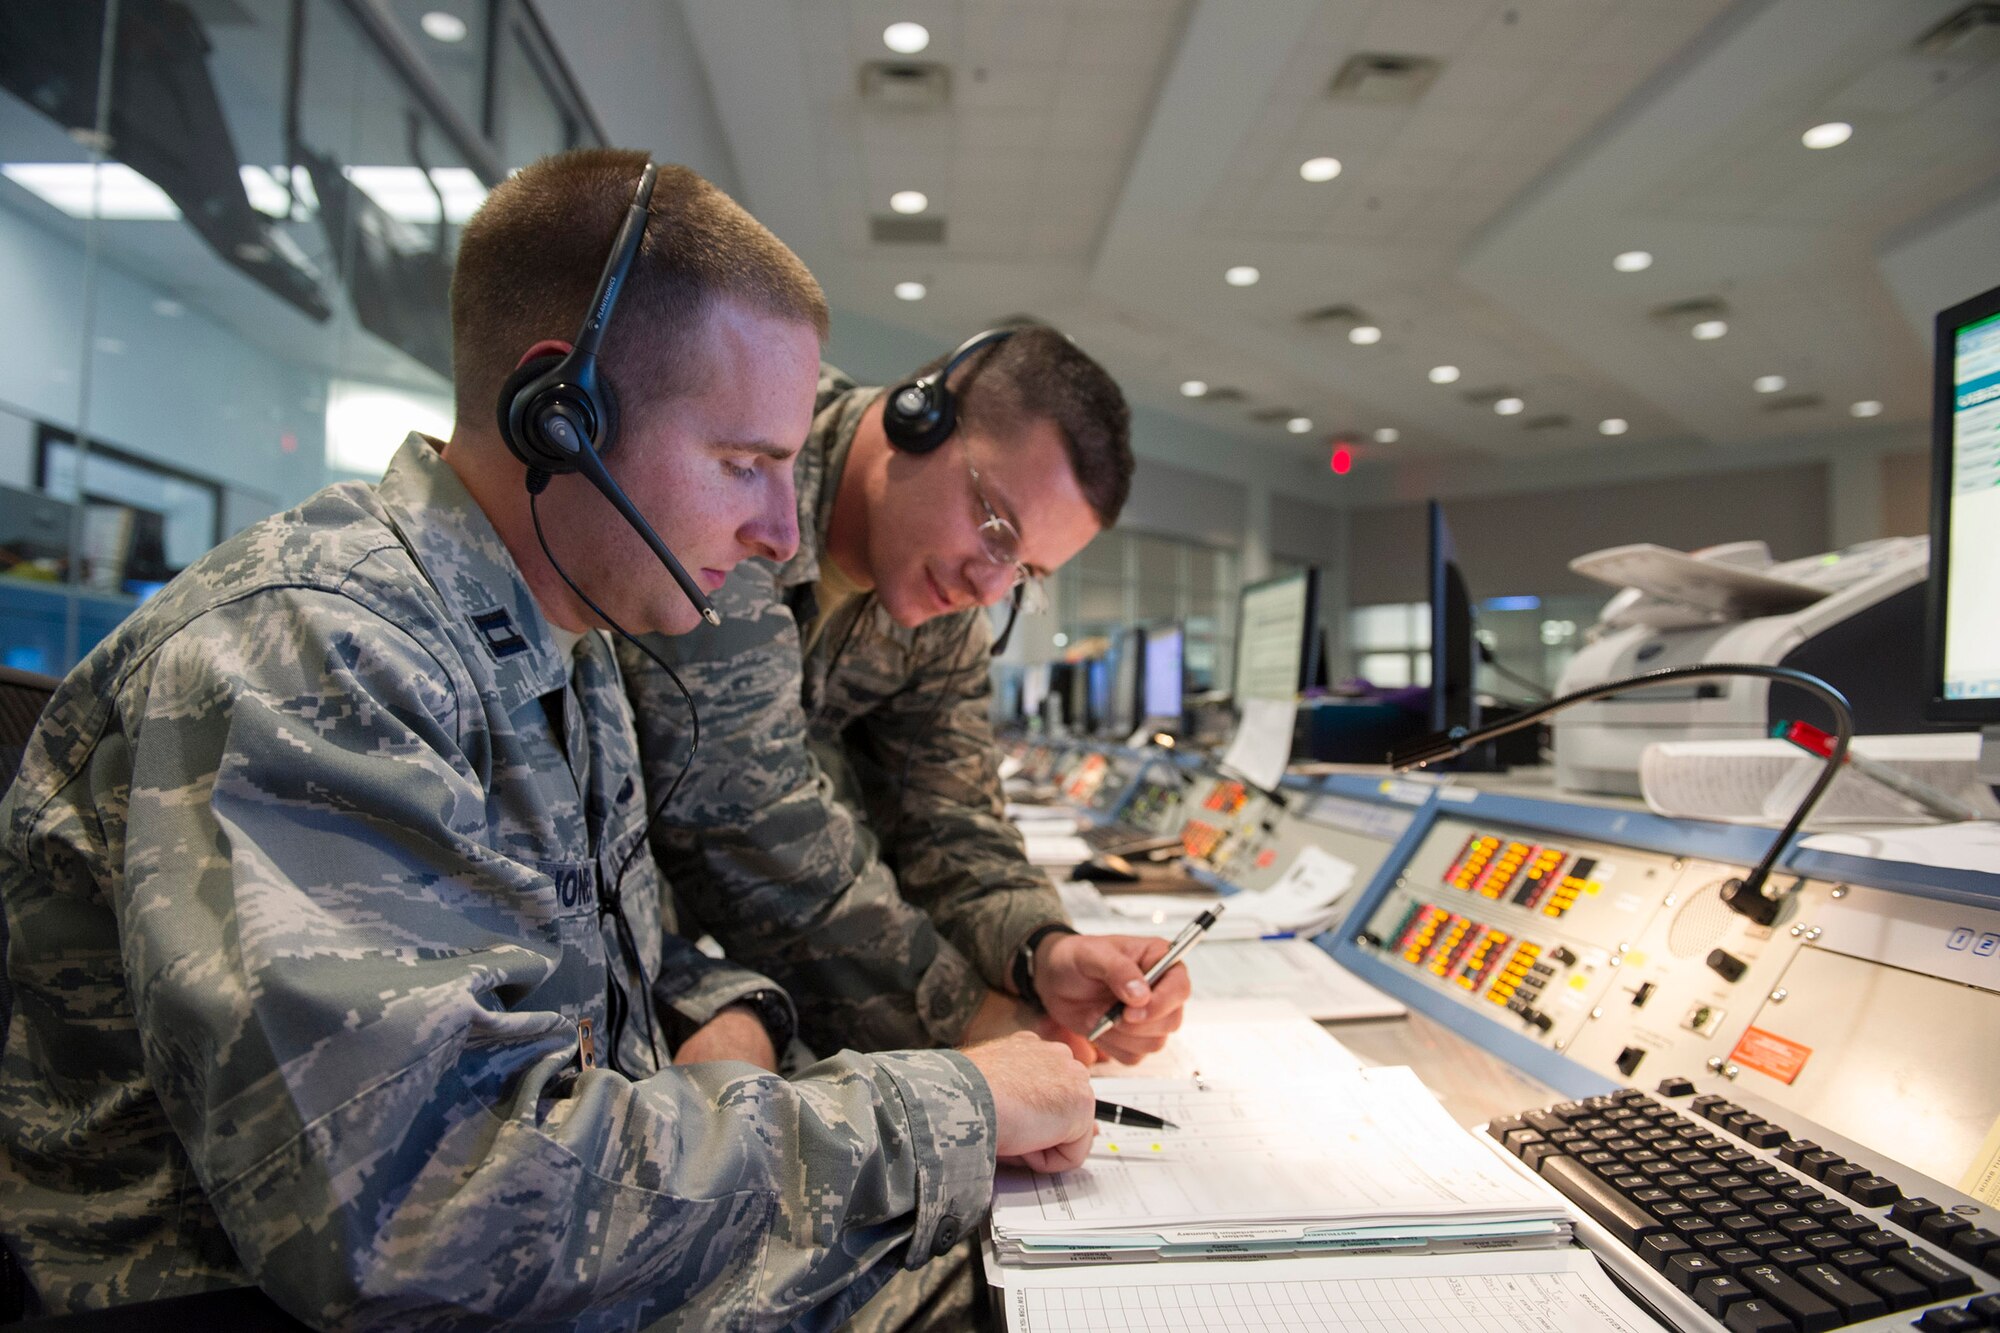 Capt. Justin Jones, left, and Capt. John Burton, both assigned with the 1st
Range Operations Squadron, go over mission-related data at the Morrell
Operations Center prior to the launch of WGS-6 from Complex 37 at Cape
Canaveral Air Force Station. (U.S. Air Force Photo/Matthew Jurgens)
